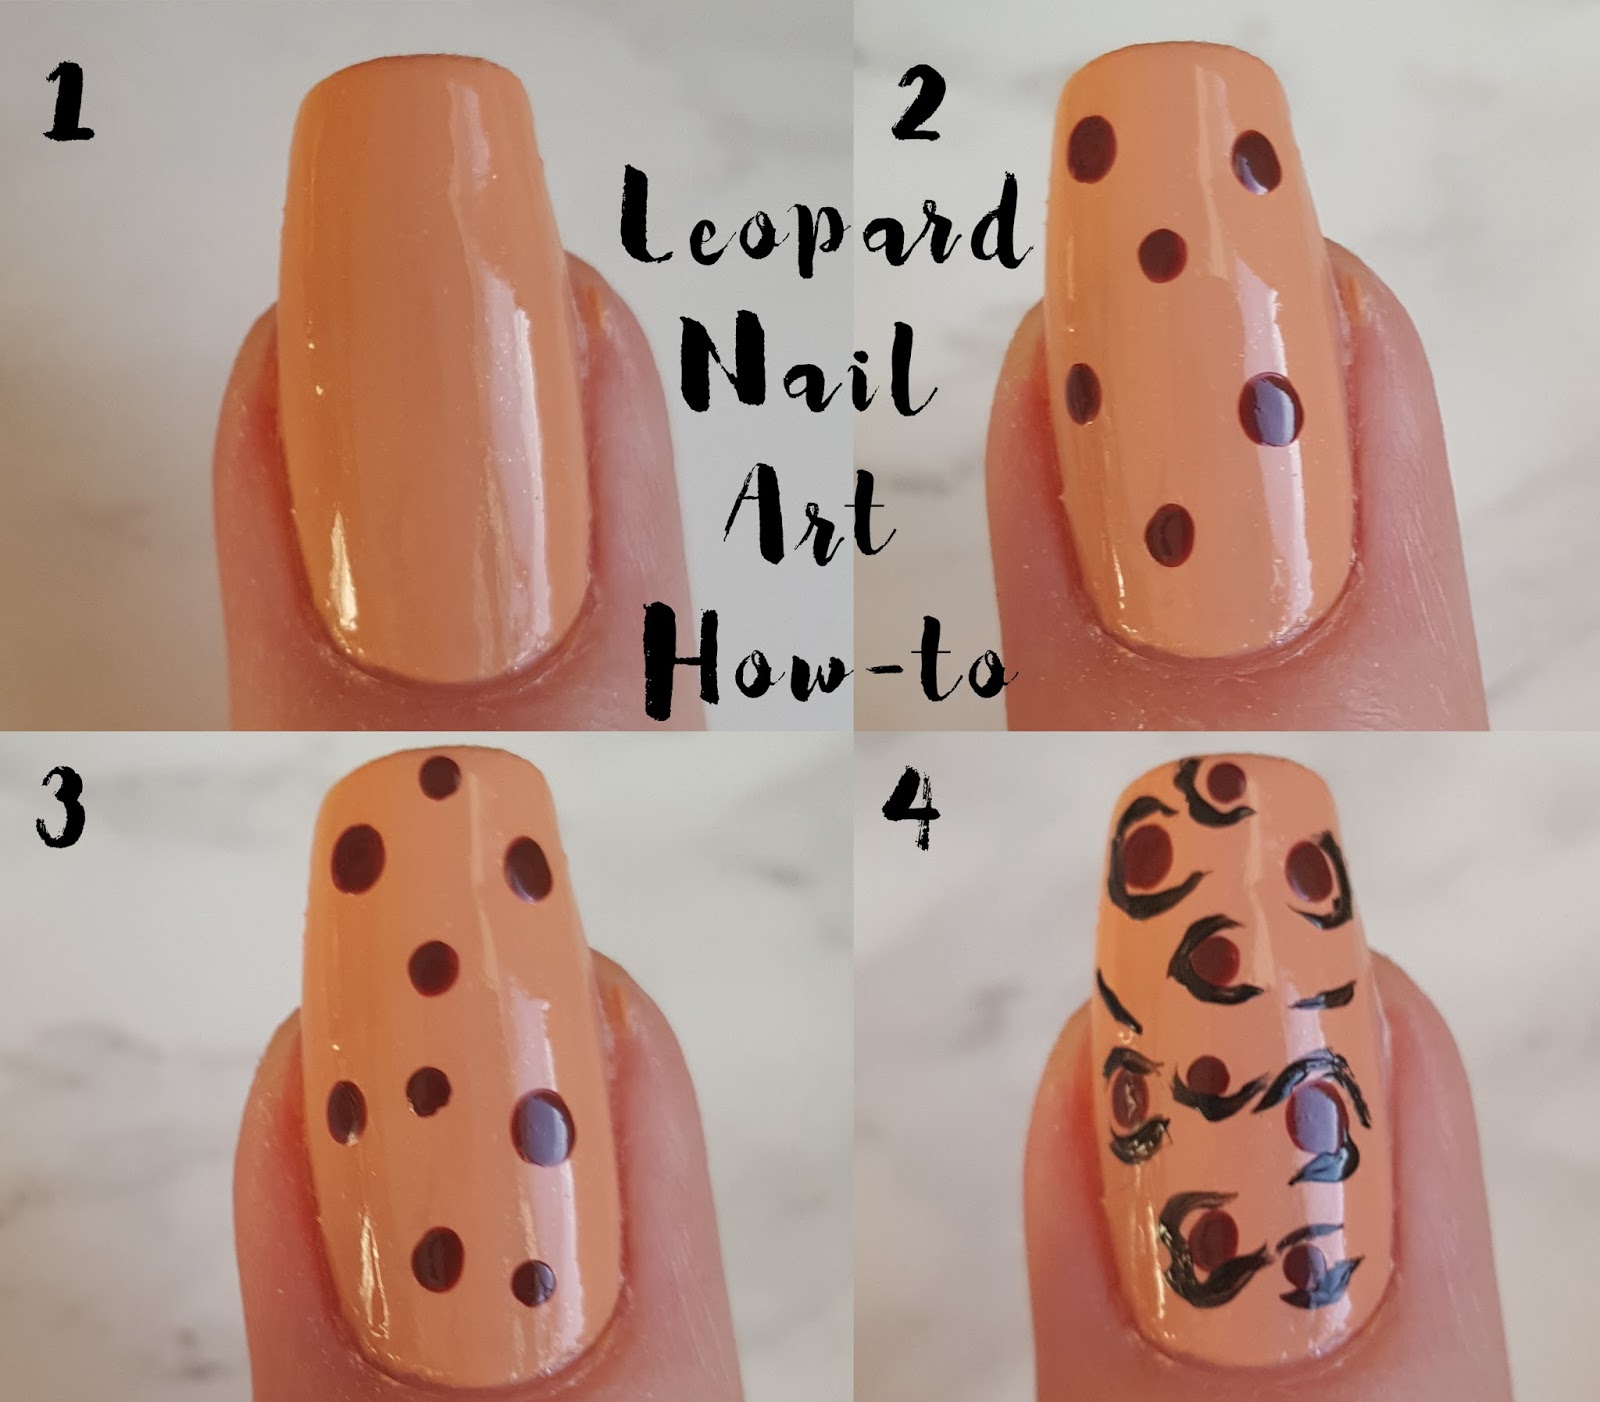 The Super-Easy (and Cheap) Way to Get Awesome Nail Art | Houstonia Magazine